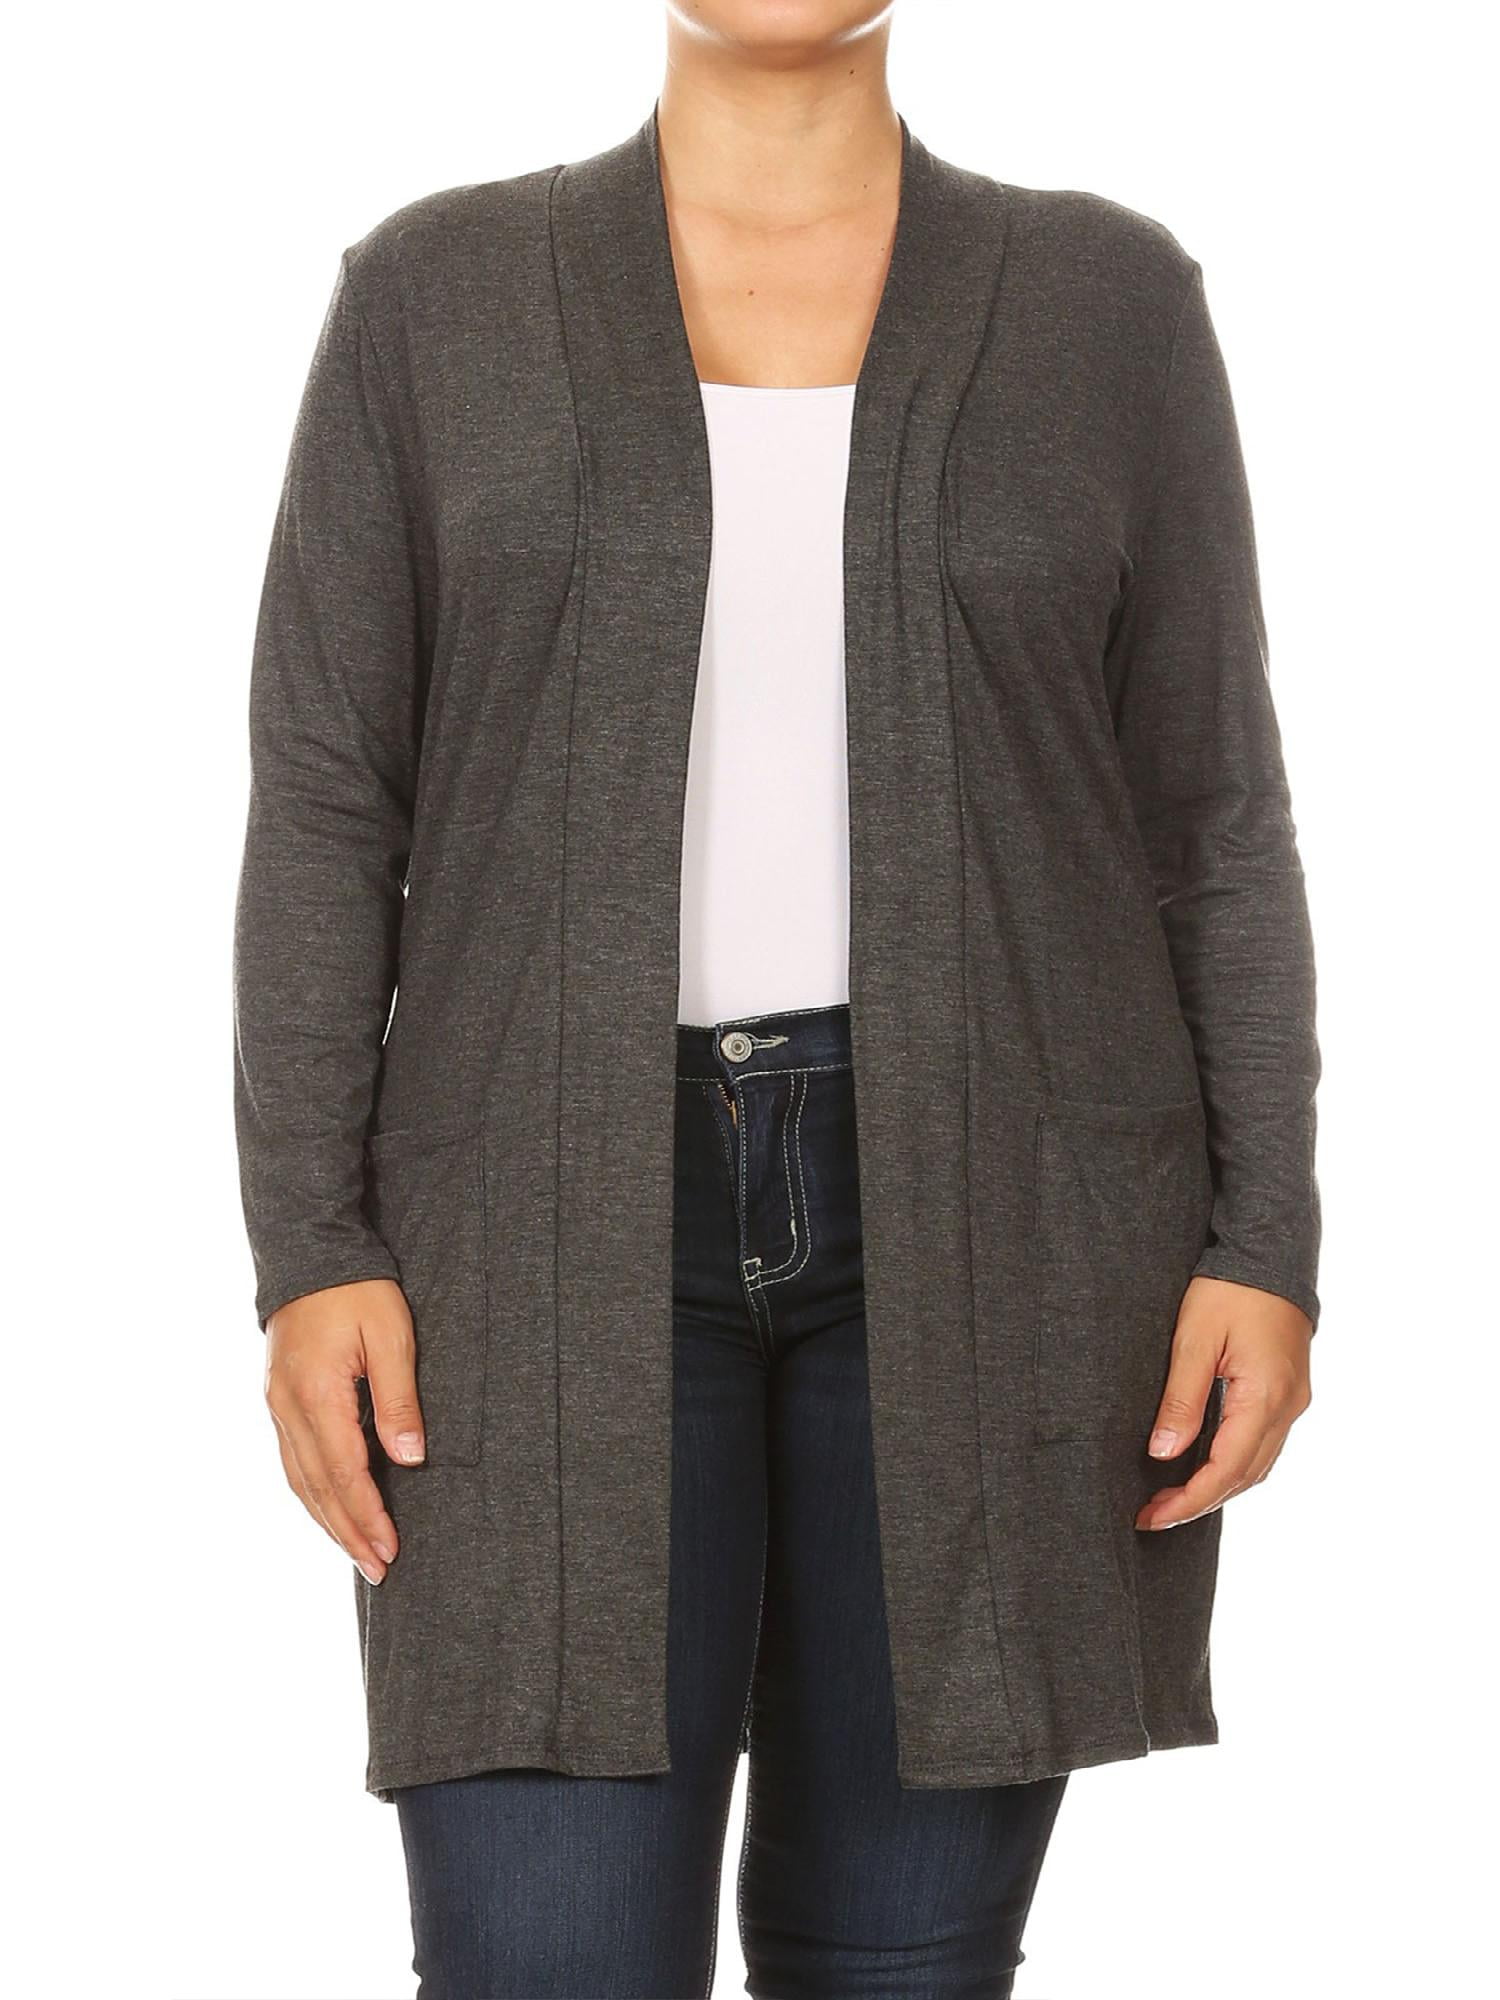 Women's Solid Casual Plus Size Pockets Knit Duster Cardigan Sweater ...